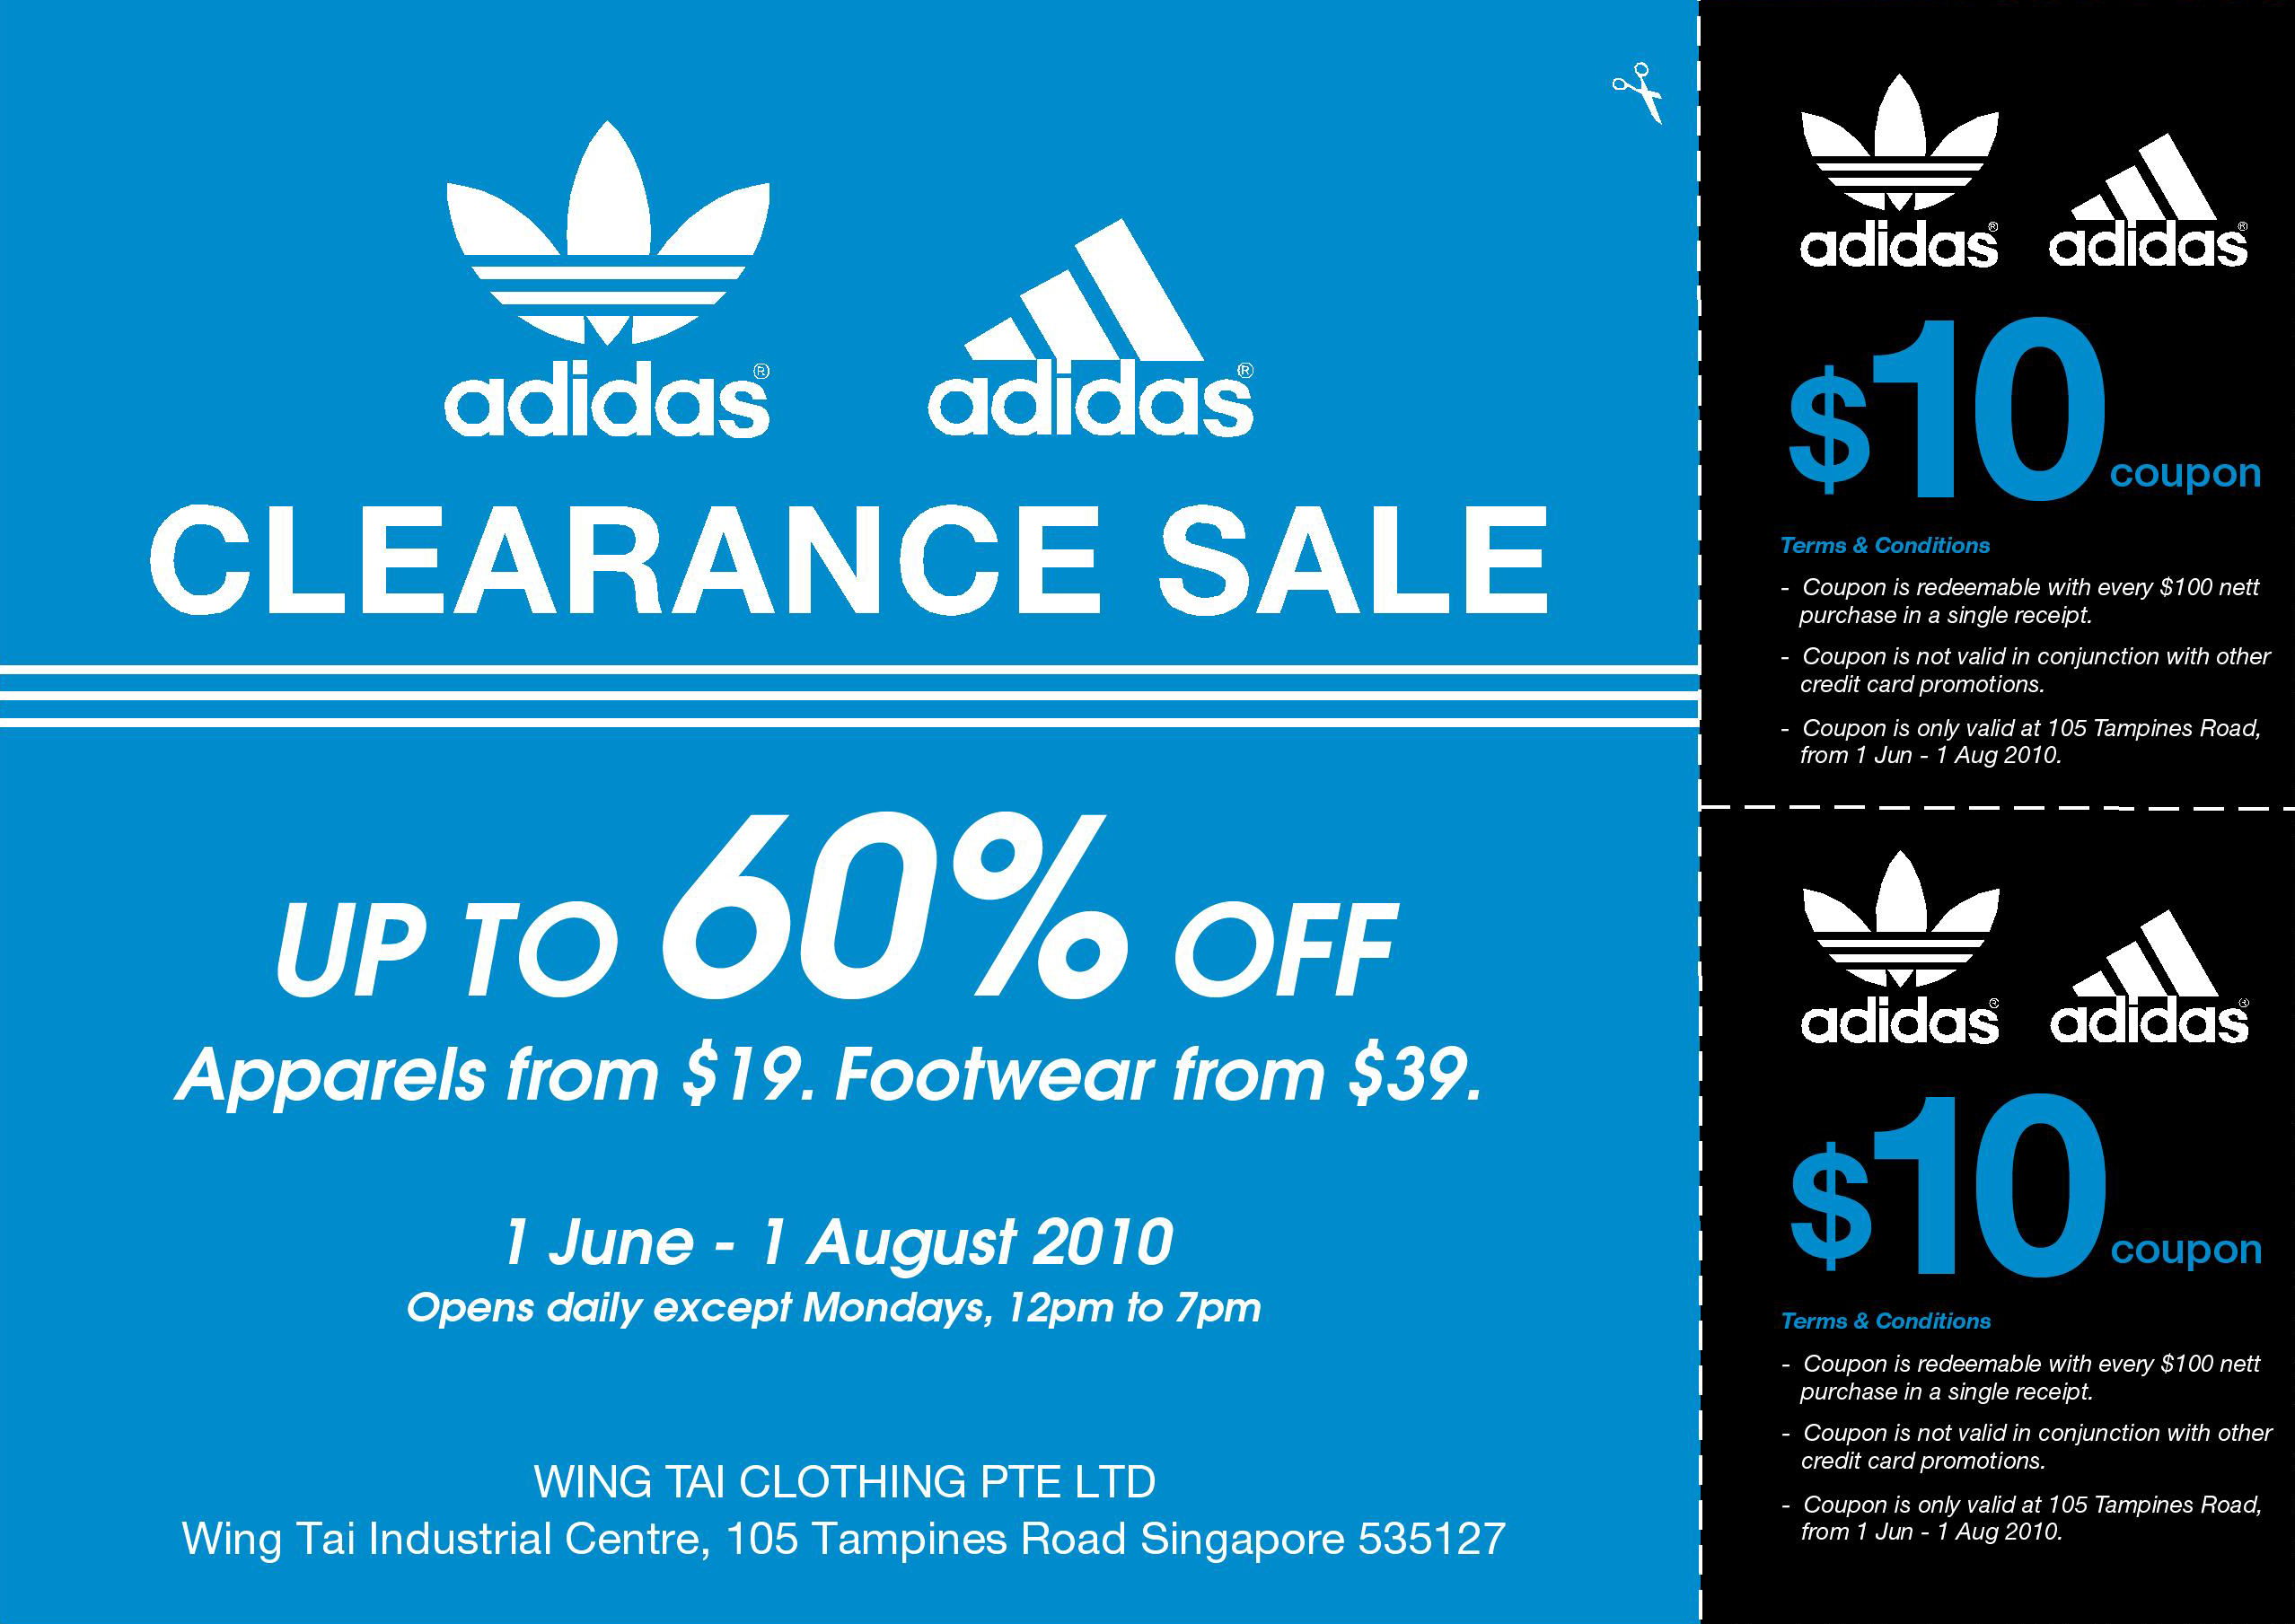 adidas outlet sale today